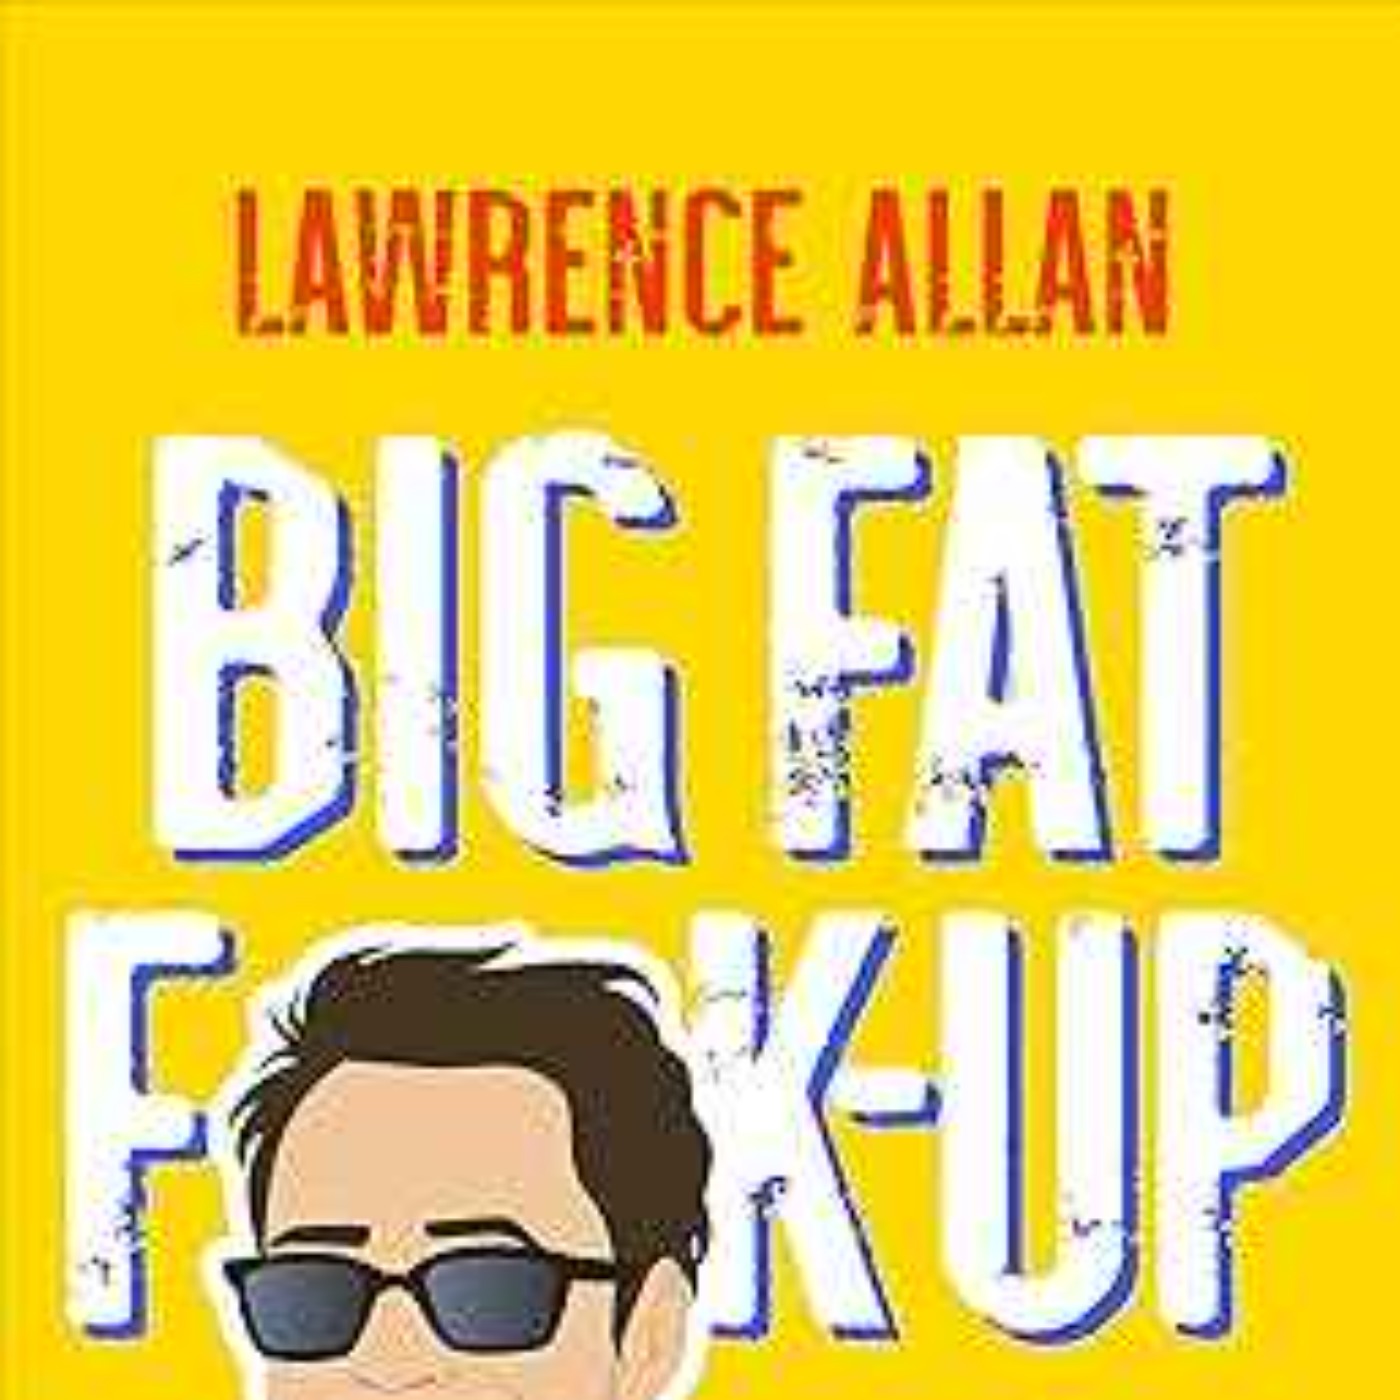 Lawrence Allan - Big F@!king Deal: A Jimmy Cooper Mystery (clean)